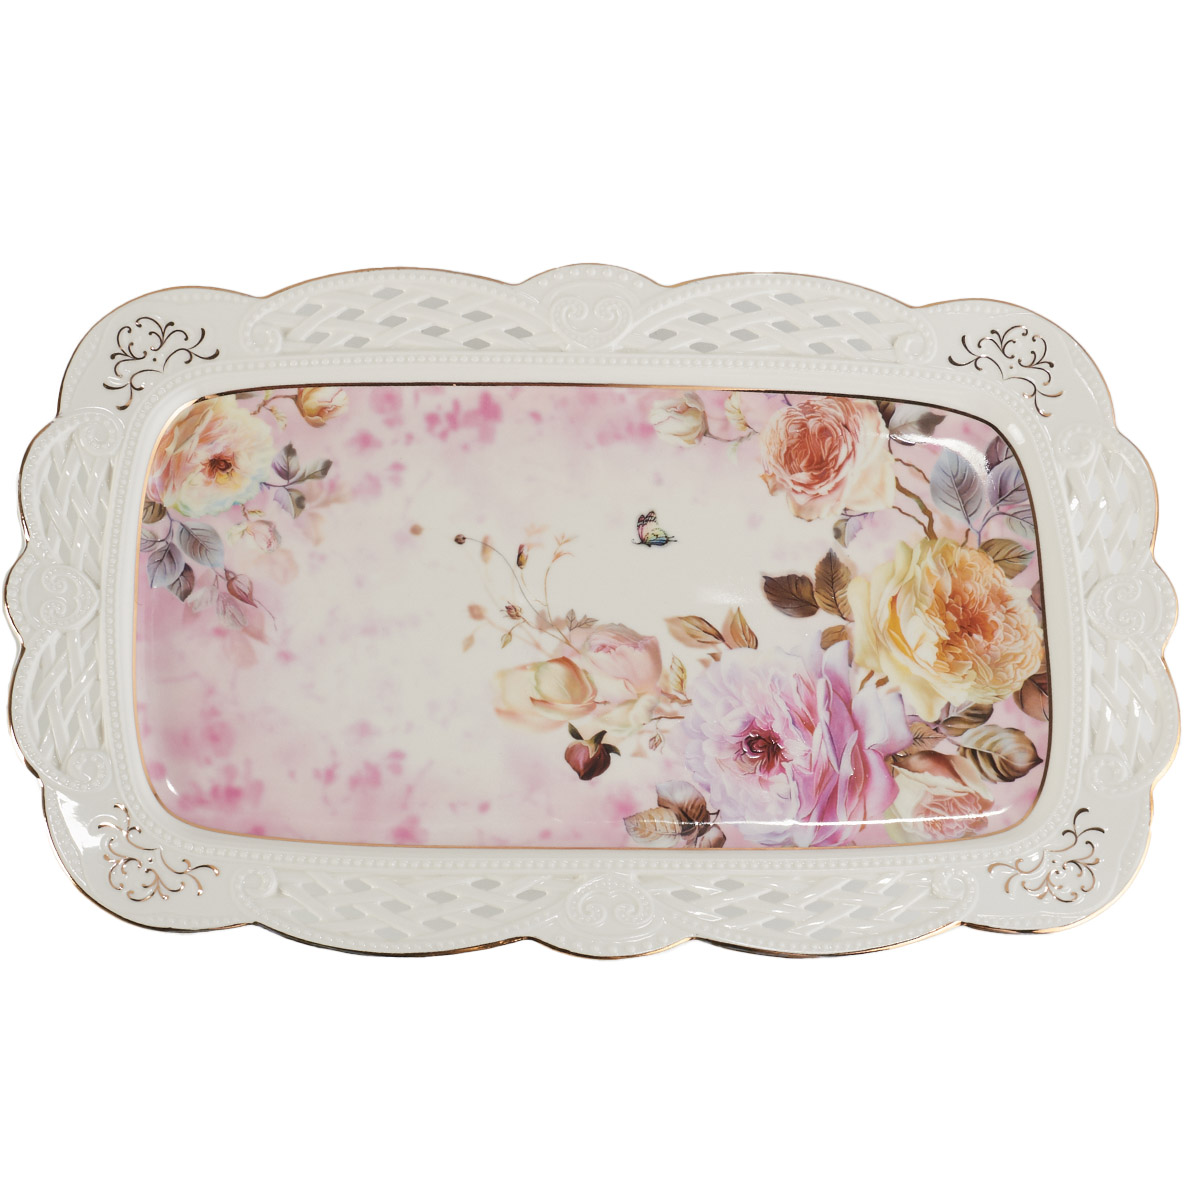 Home Essentials Rosette Floral Pierced Serving Tray